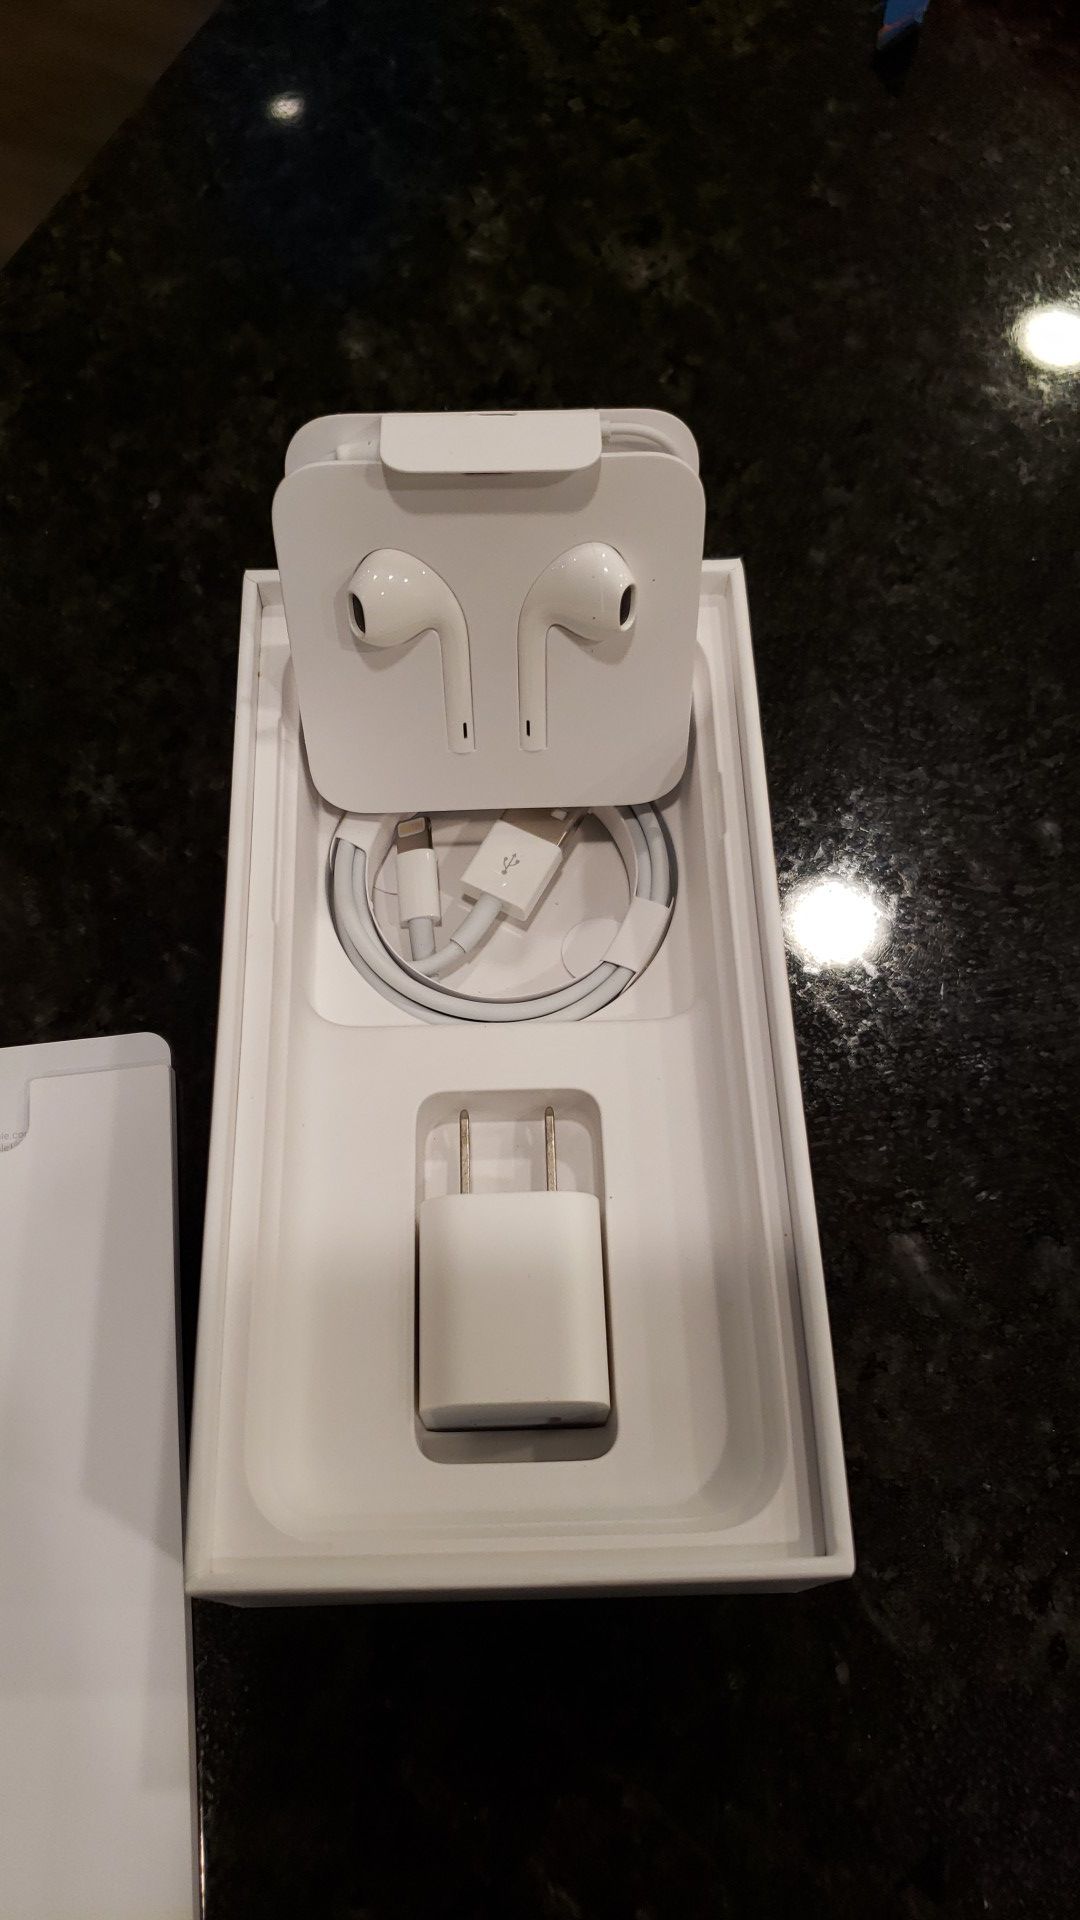 Silver or black iPhone 7 box with charger, cord and original earbuds